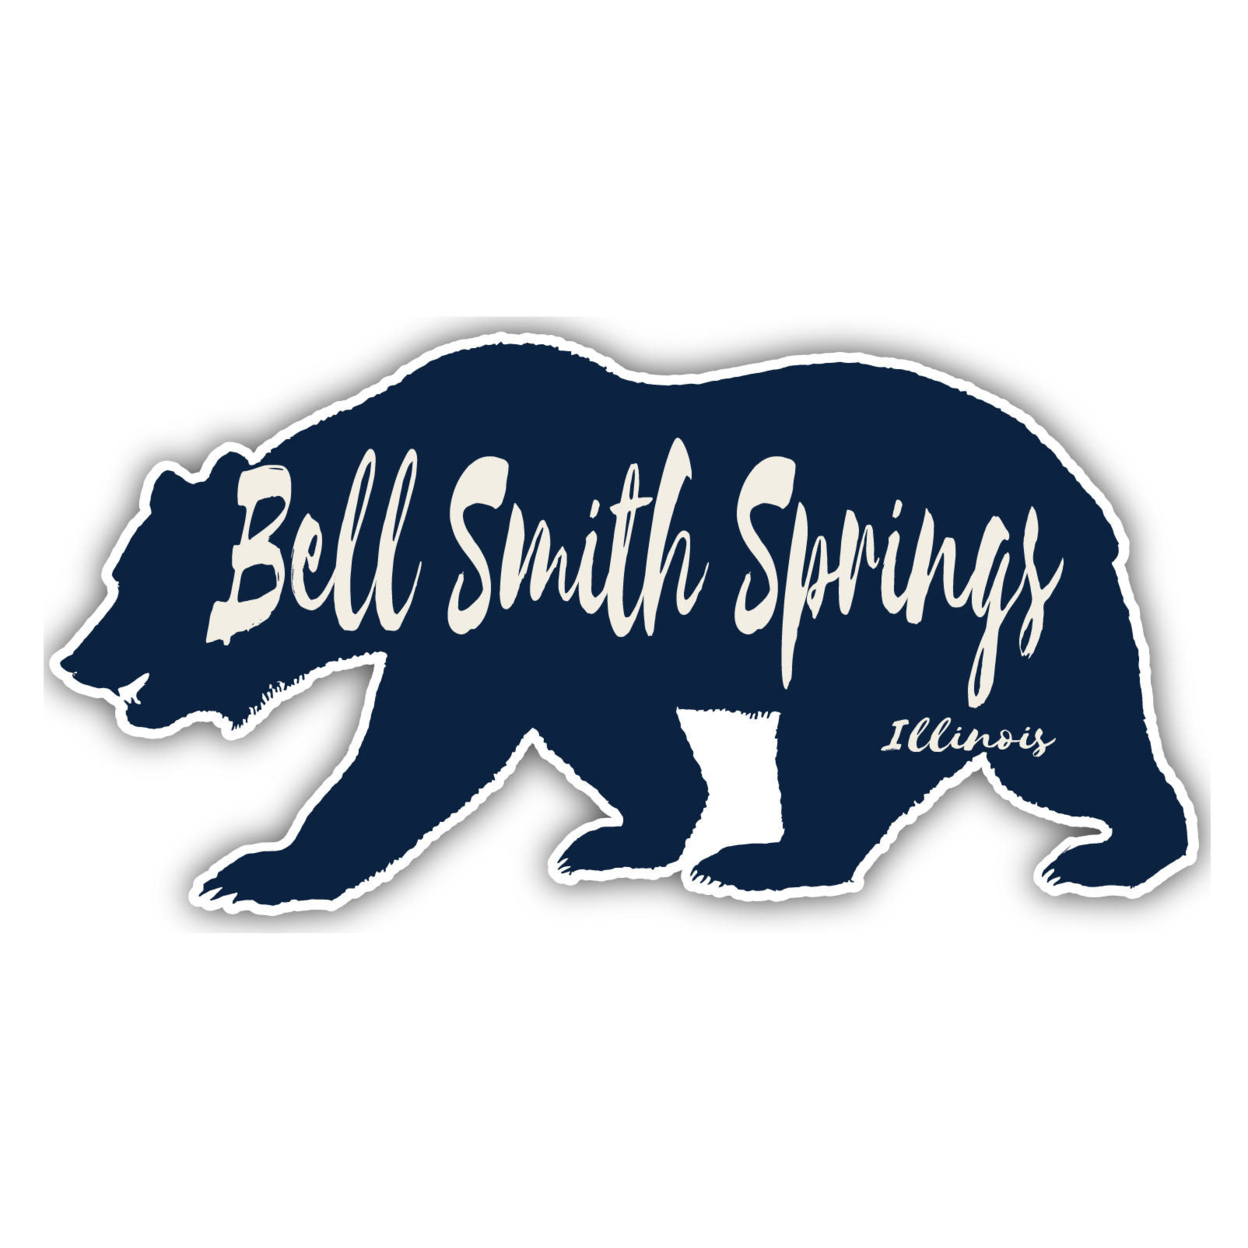 Bell Smith Springs Illinois Souvenir Decorative Stickers (Choose Theme And Size) - Single Unit, 2-Inch, Tent